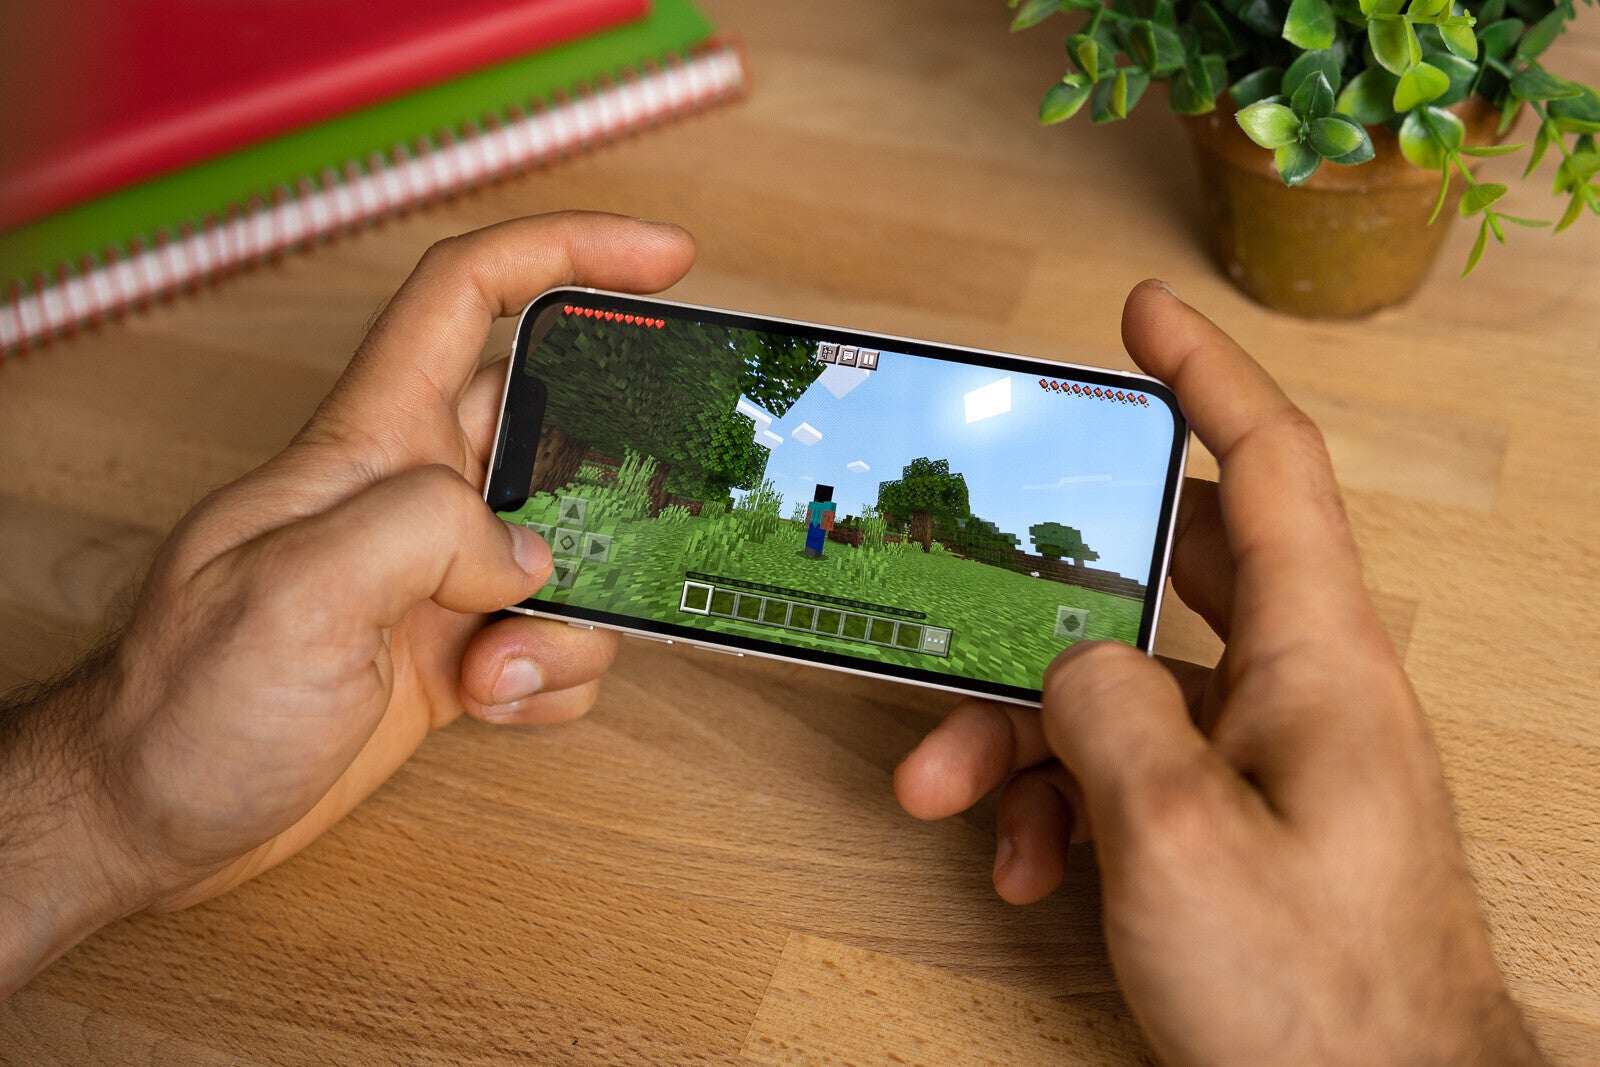 Up to 5 hours and 49 minutes of gaming, 6 hours and 20 minutes of YouTube, according to our tests - I switched from big Android phones to the iPhone 13 mini: Any regrets?